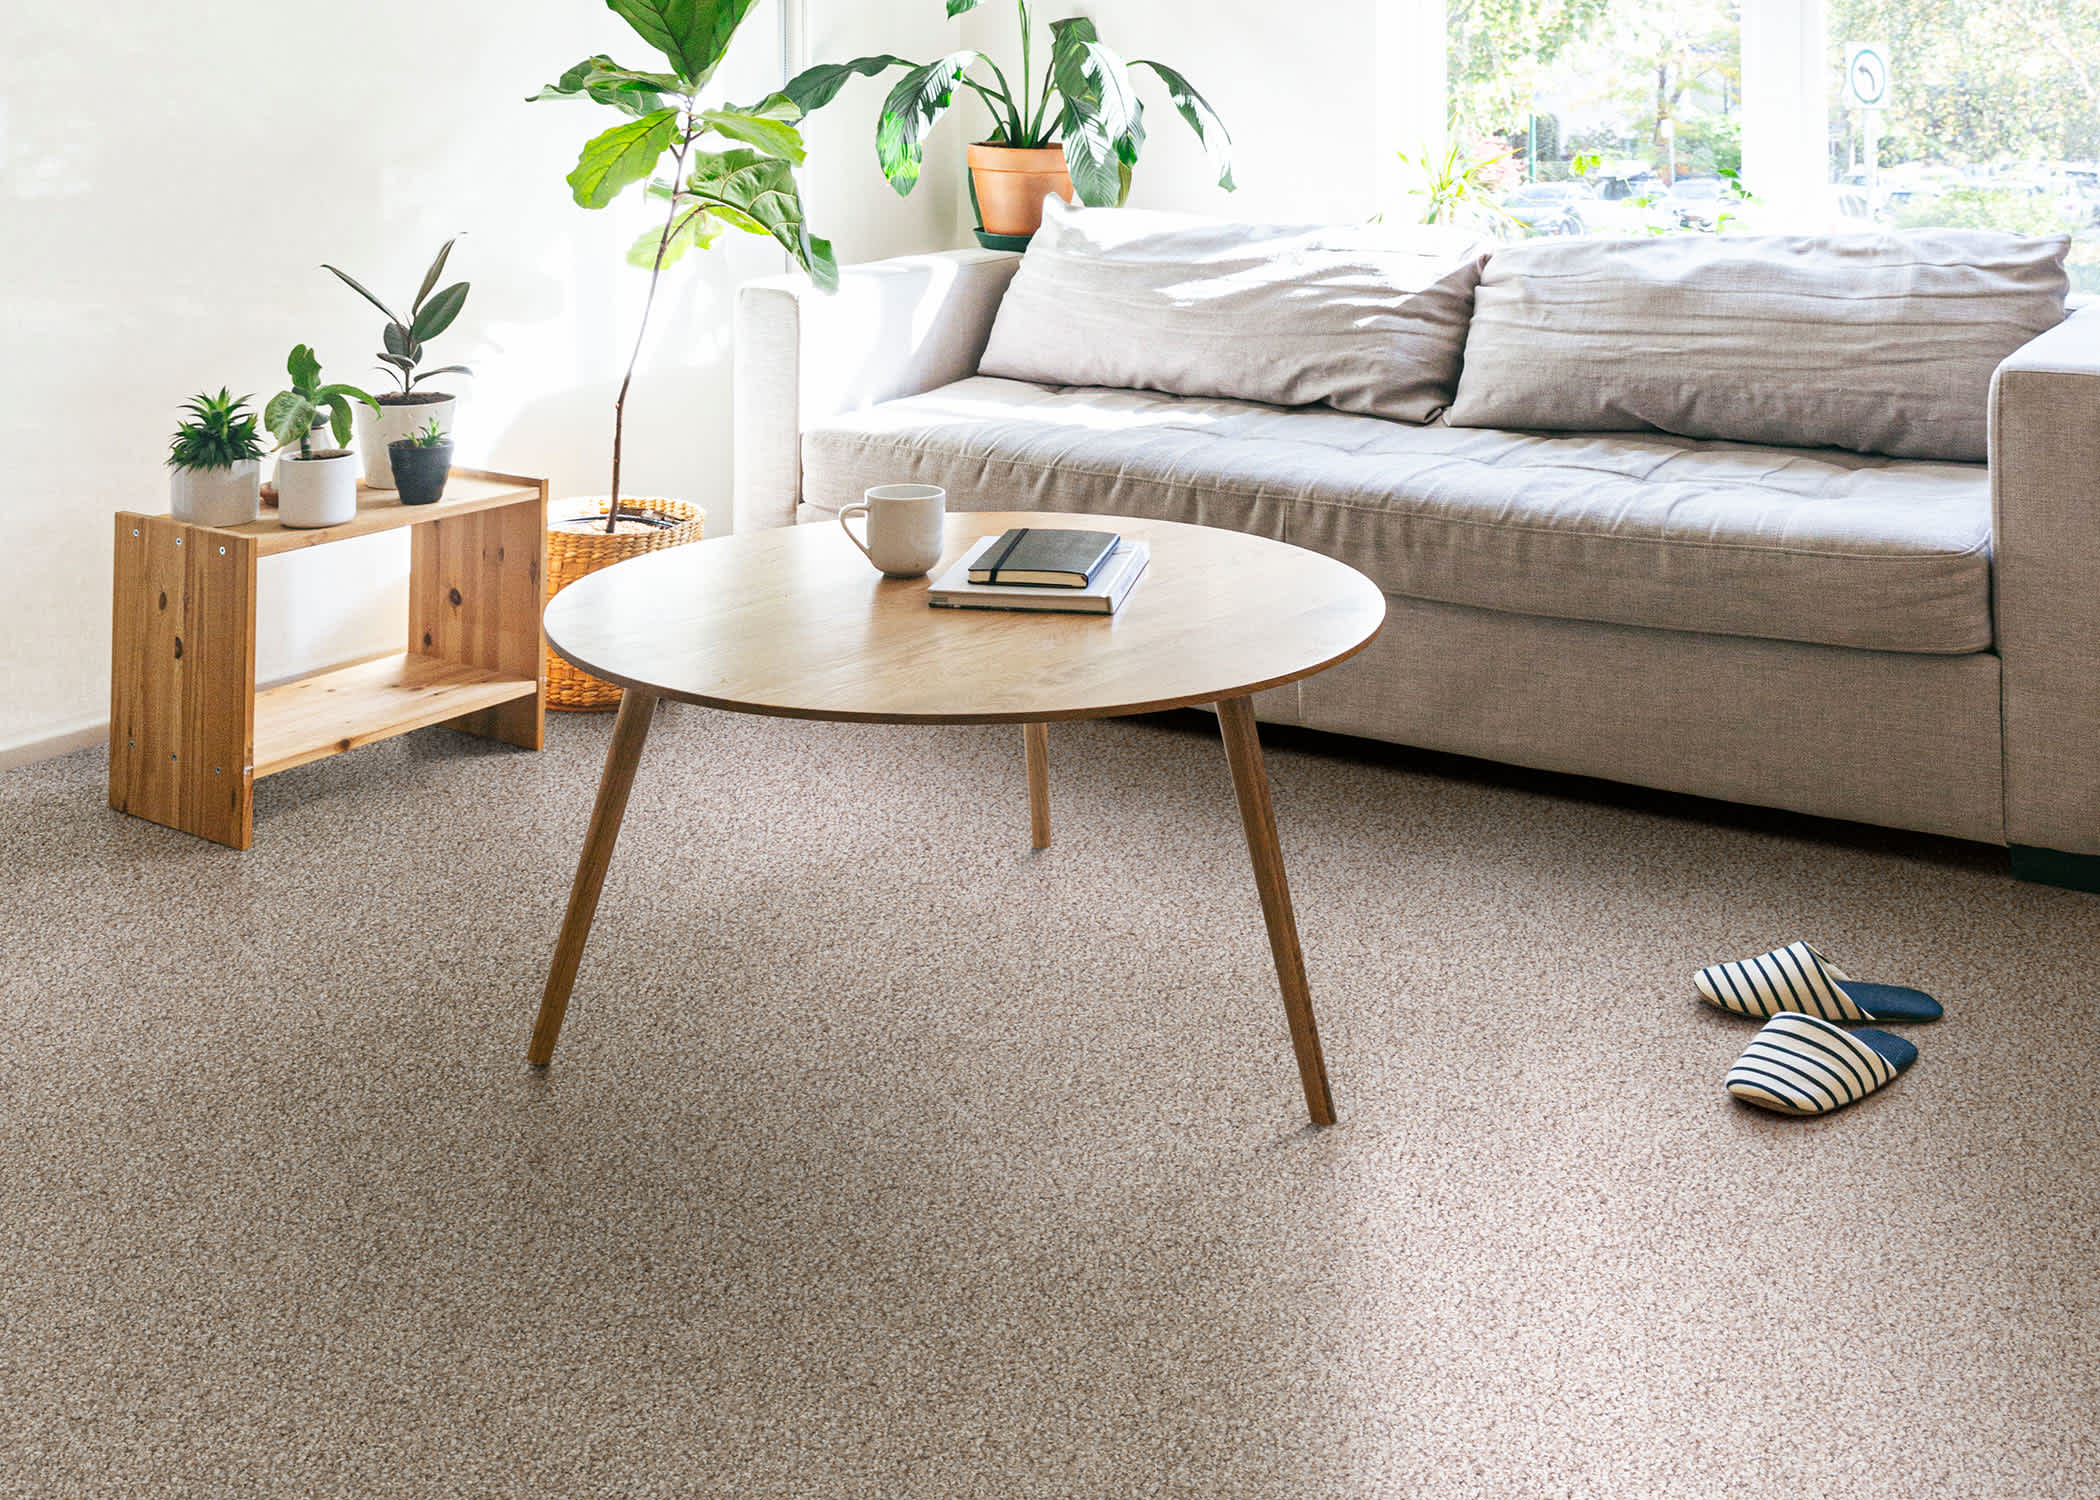 Image of brown carpet in a living room